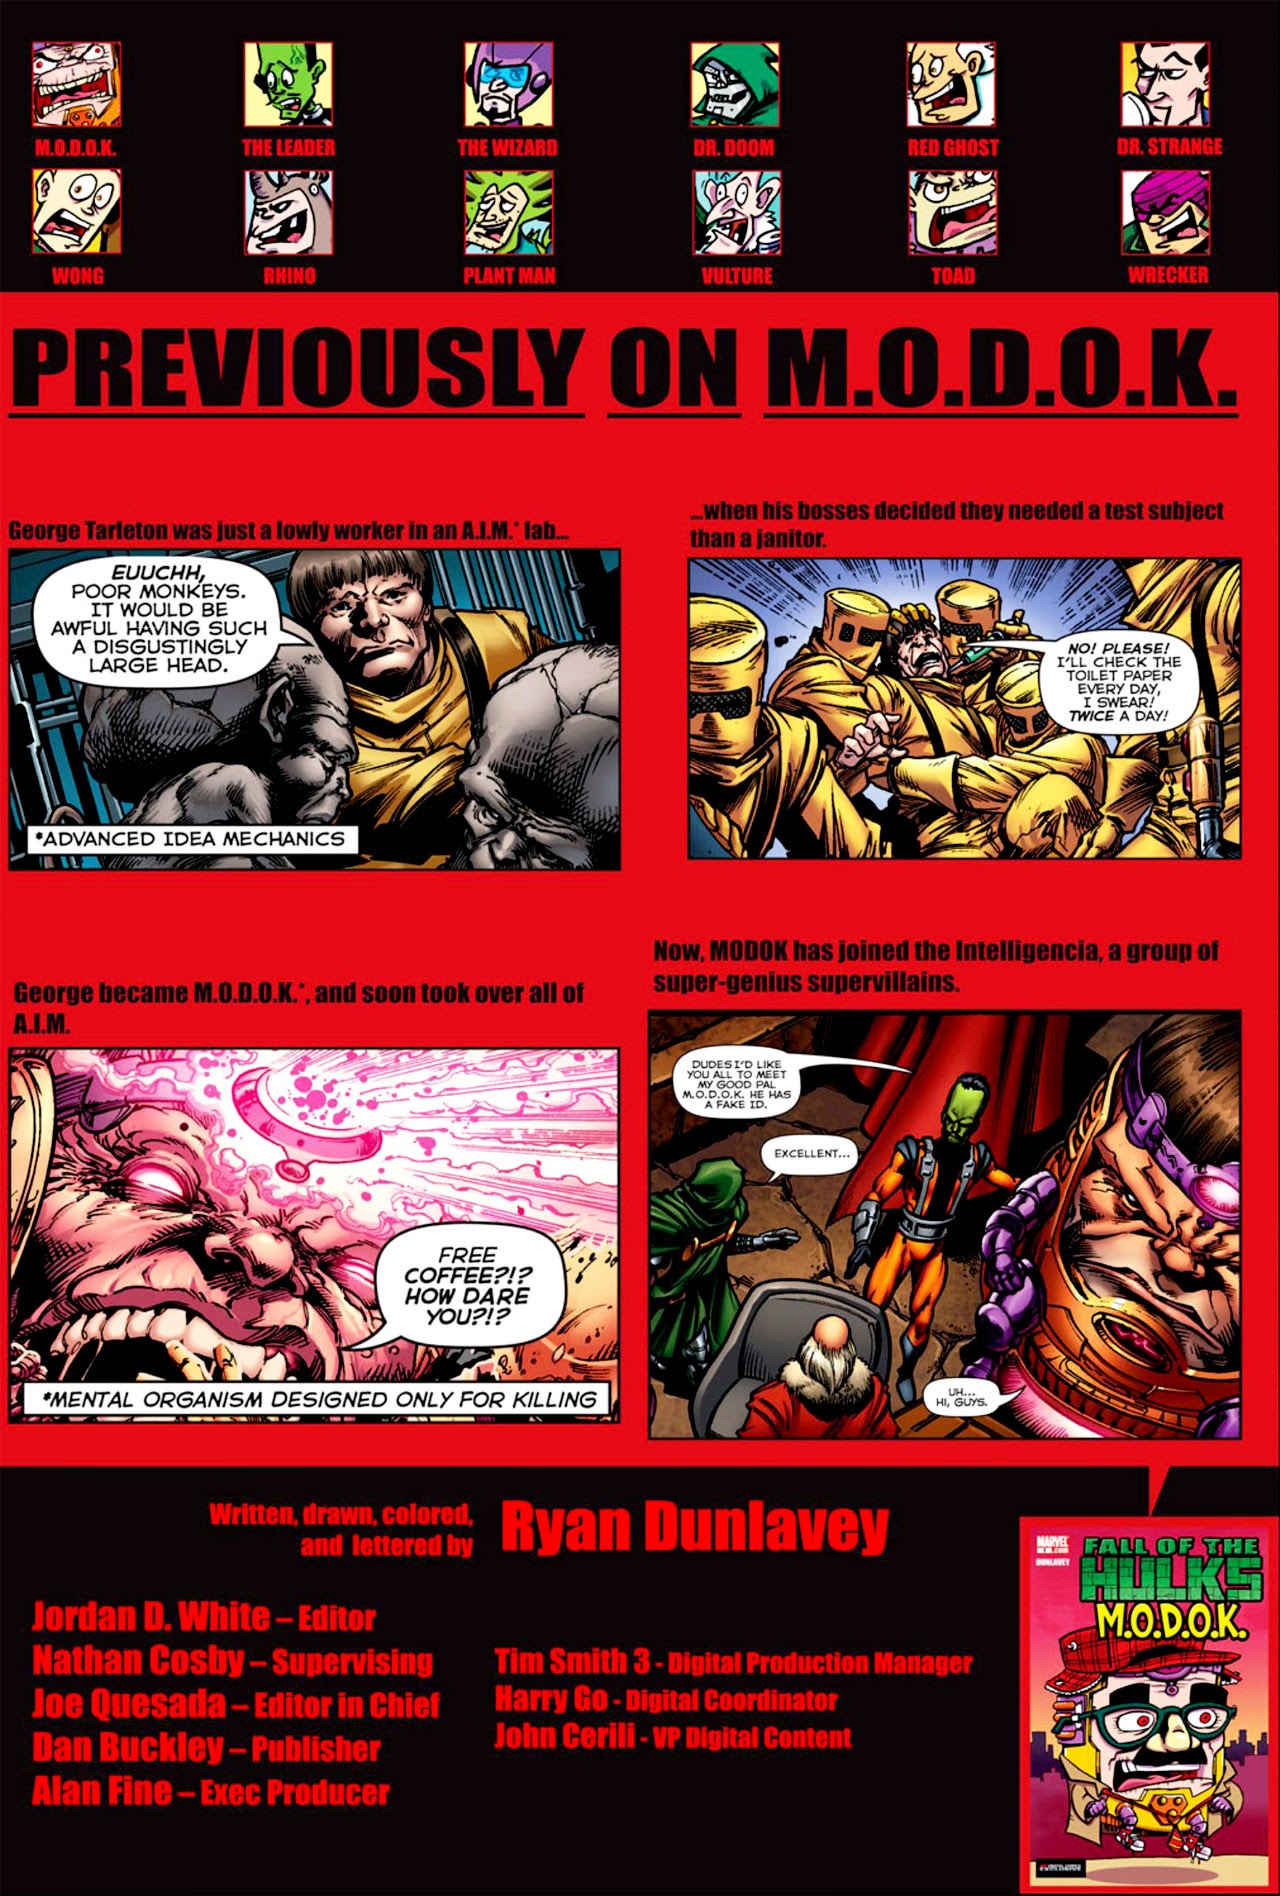 Read online Fall of the Hulks: M.O.D.O.K. comic -  Issue # Full - 2